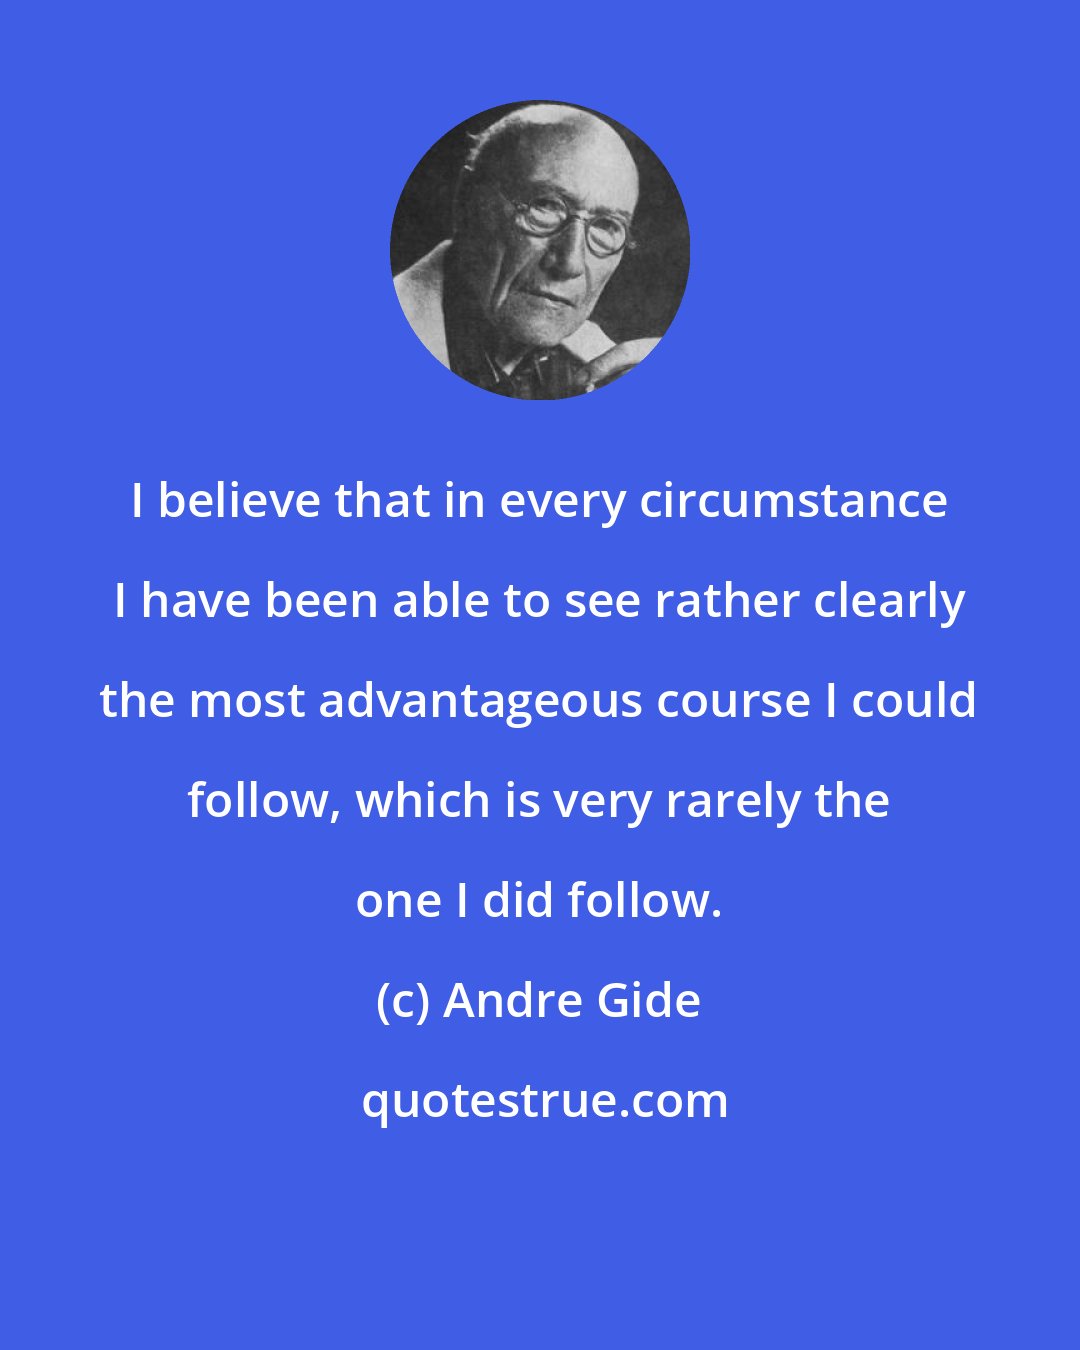 Andre Gide: I believe that in every circumstance I have been able to see rather clearly the most advantageous course I could follow, which is very rarely the one I did follow.